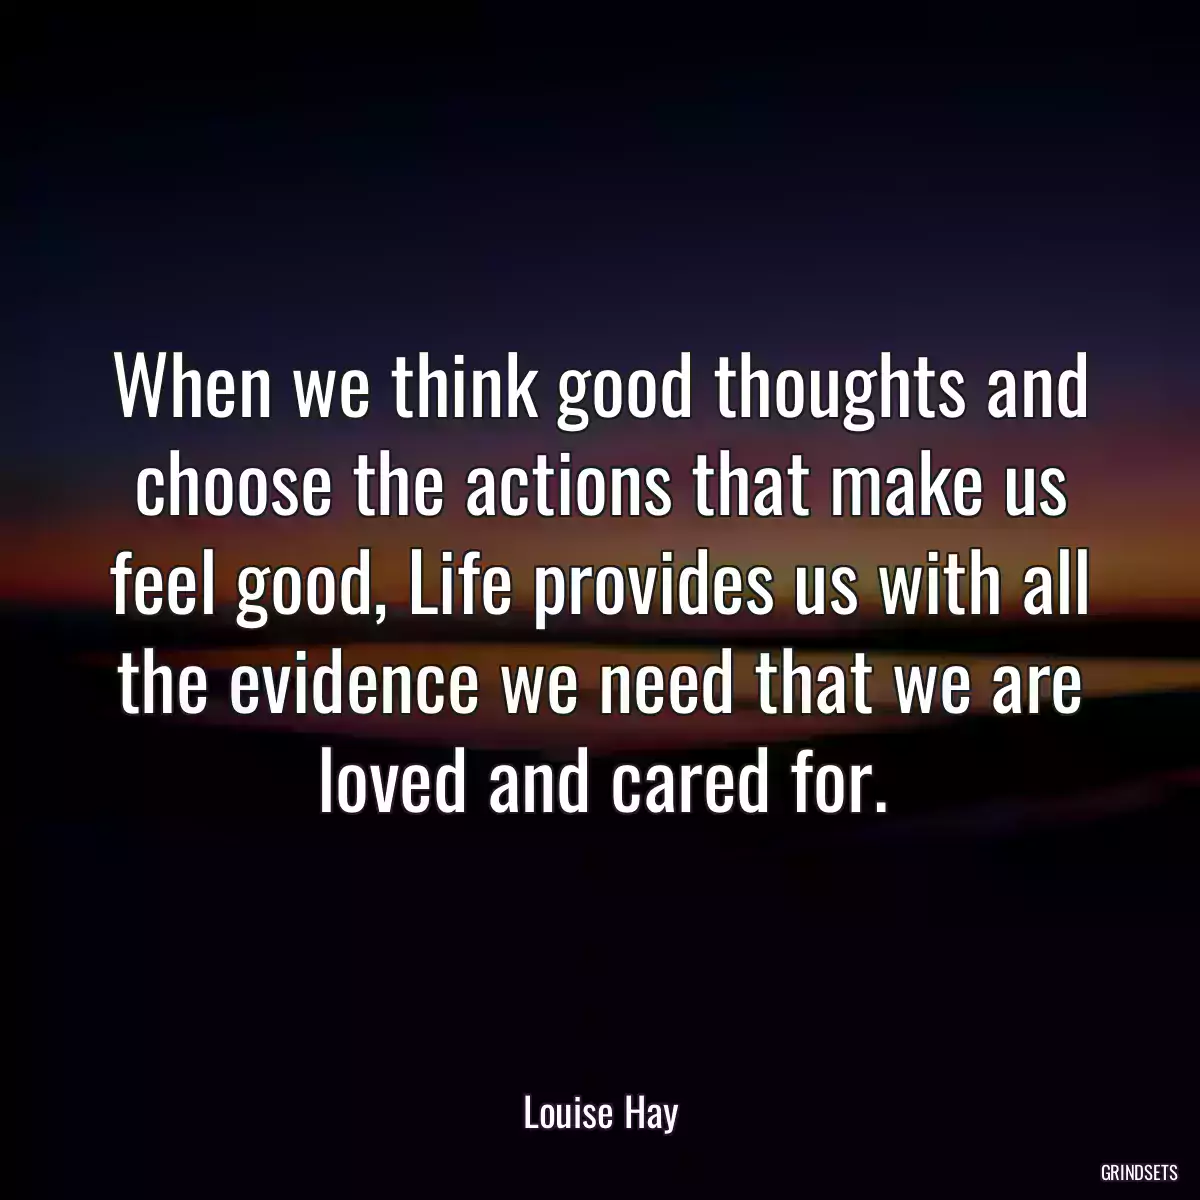 When we think good thoughts and choose the actions that make us feel good, Life provides us with all the evidence we need that we are loved and cared for.